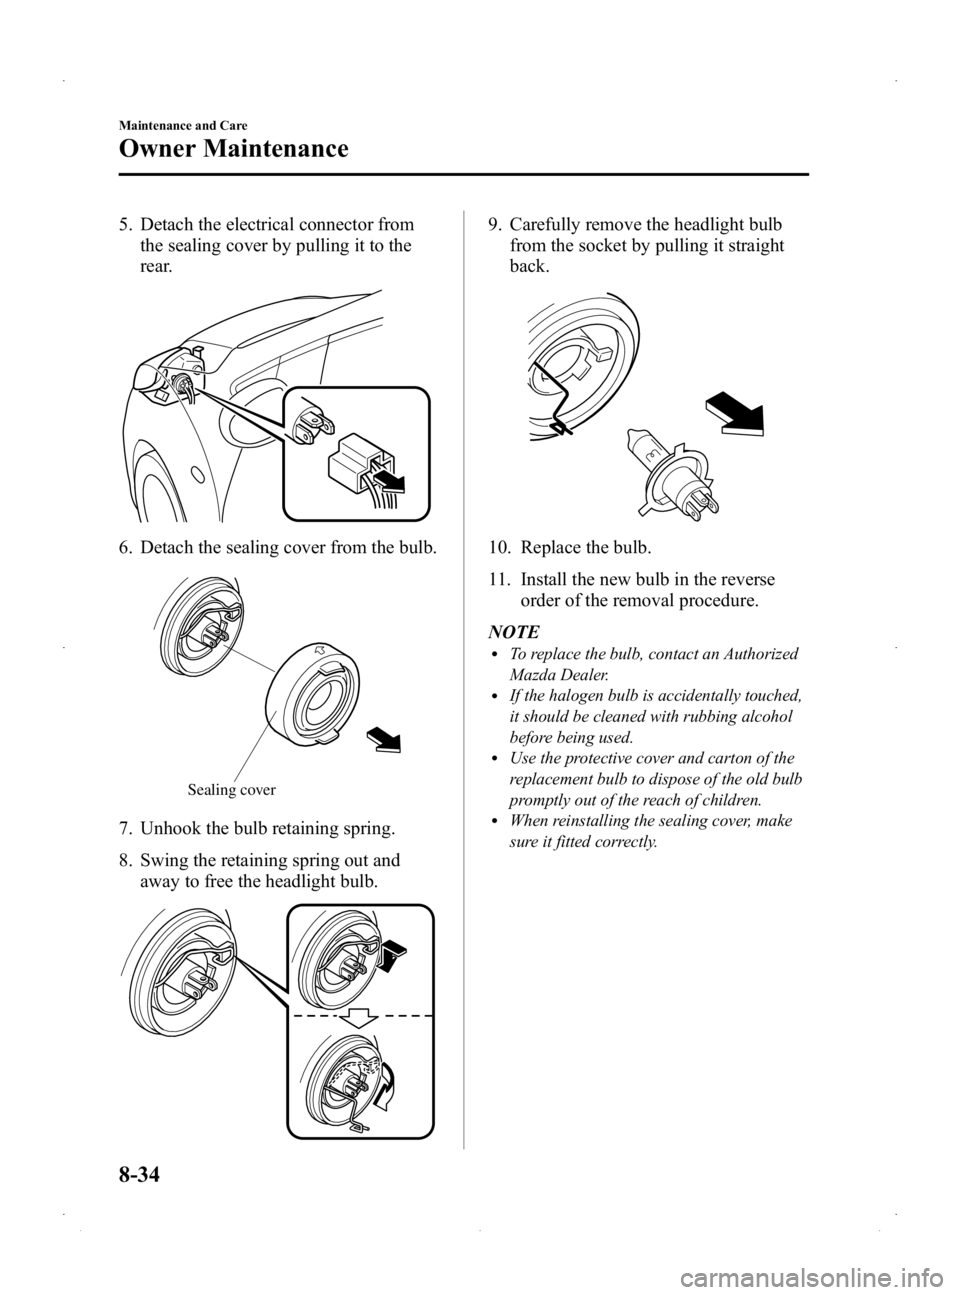 MAZDA MODEL 2 2014  Owners Manual Black plate (278,1)
5. Detach the electrical connector fromthe sealing cover by pulling it to the
rear.
6. Detach the sealing cover from the bulb.
Sealing cover
7. Unhook the bulb retaining spring.
8.